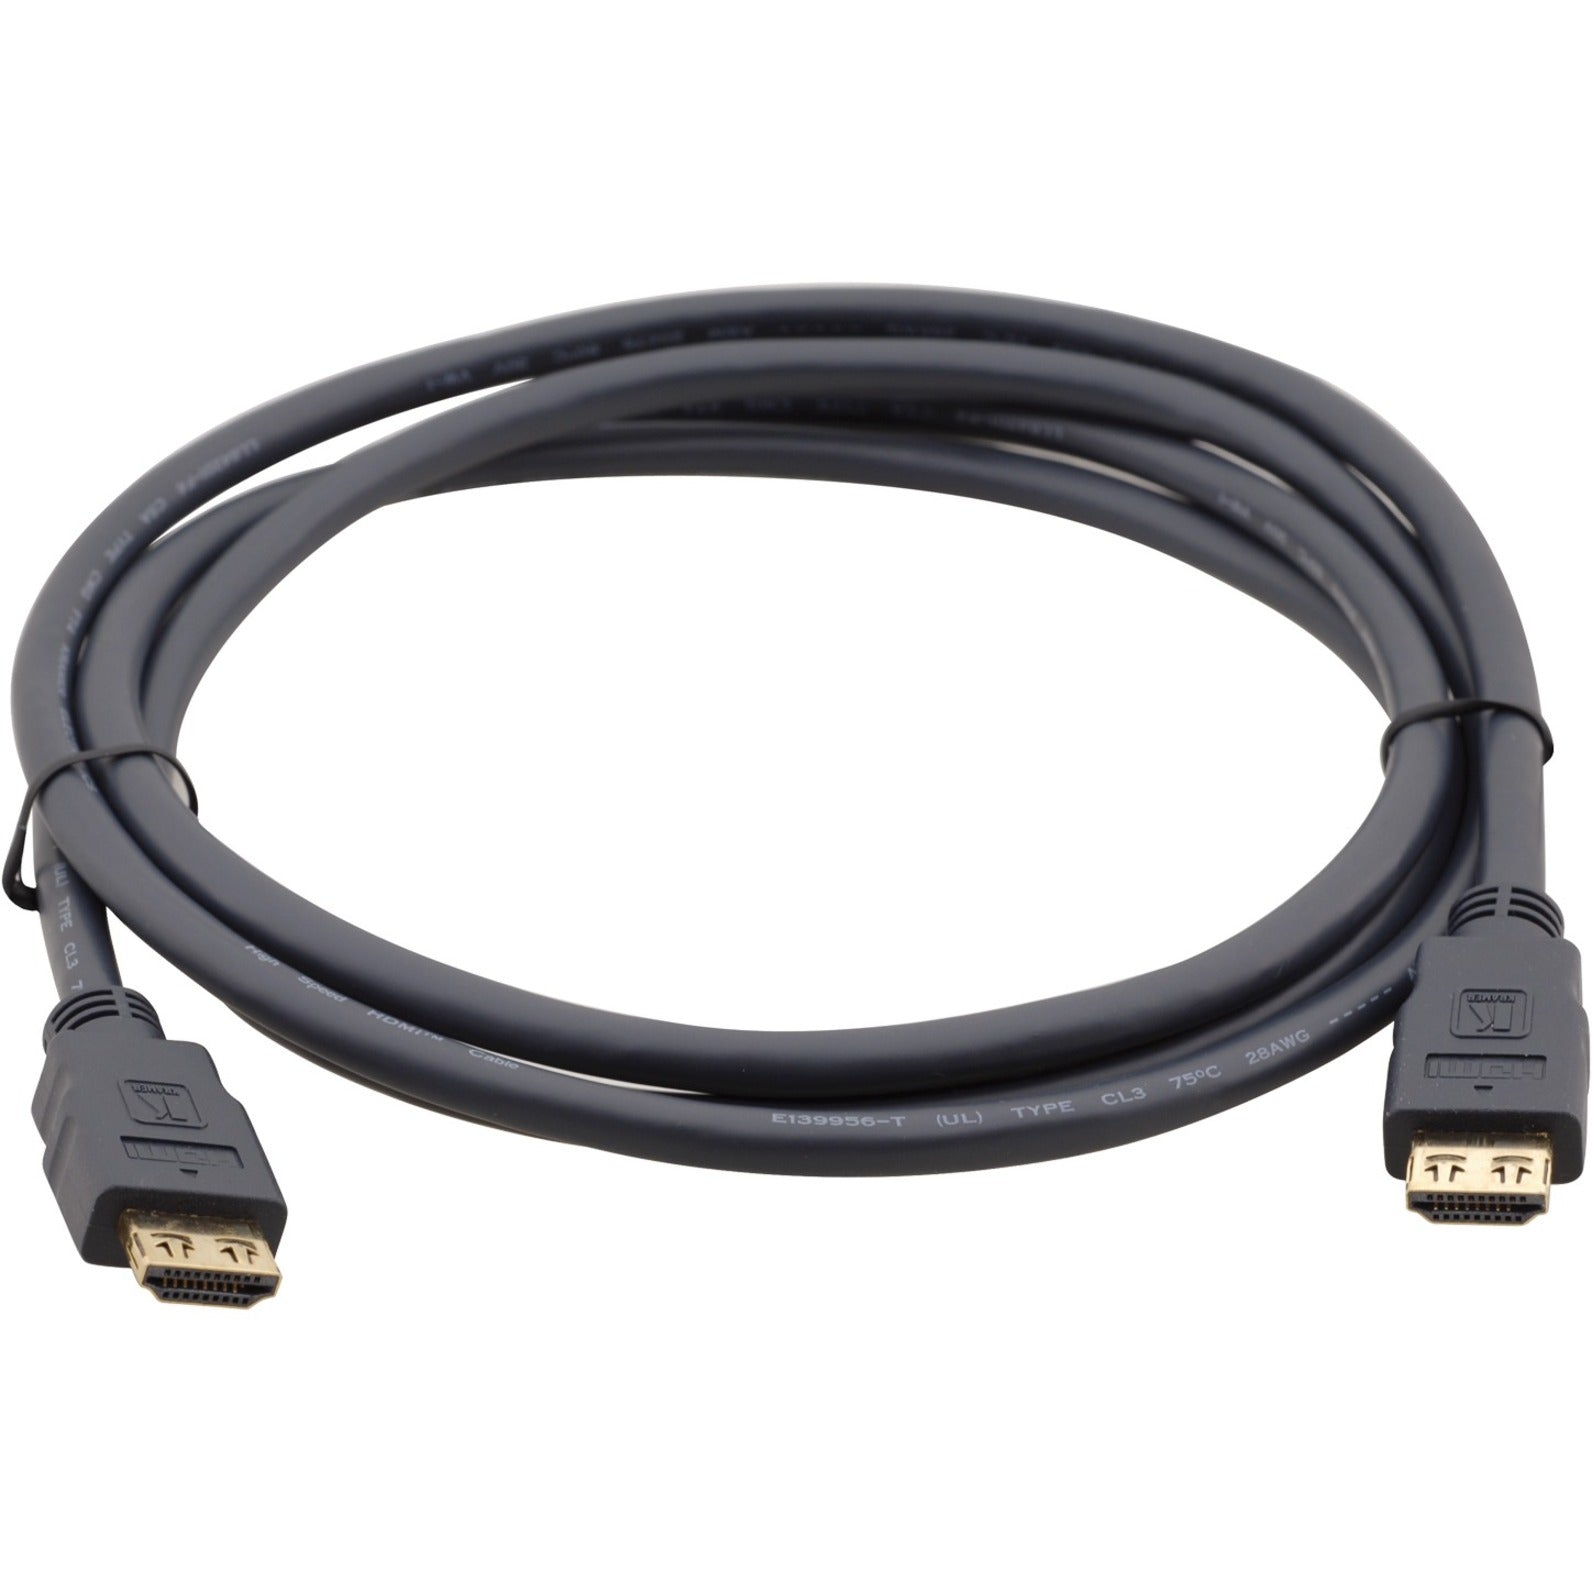 Kramer 97-0101010 Standard HDMI (M) to HDMI (M) Cable, 10 ft, Gold Plated, K-Lock, Molded